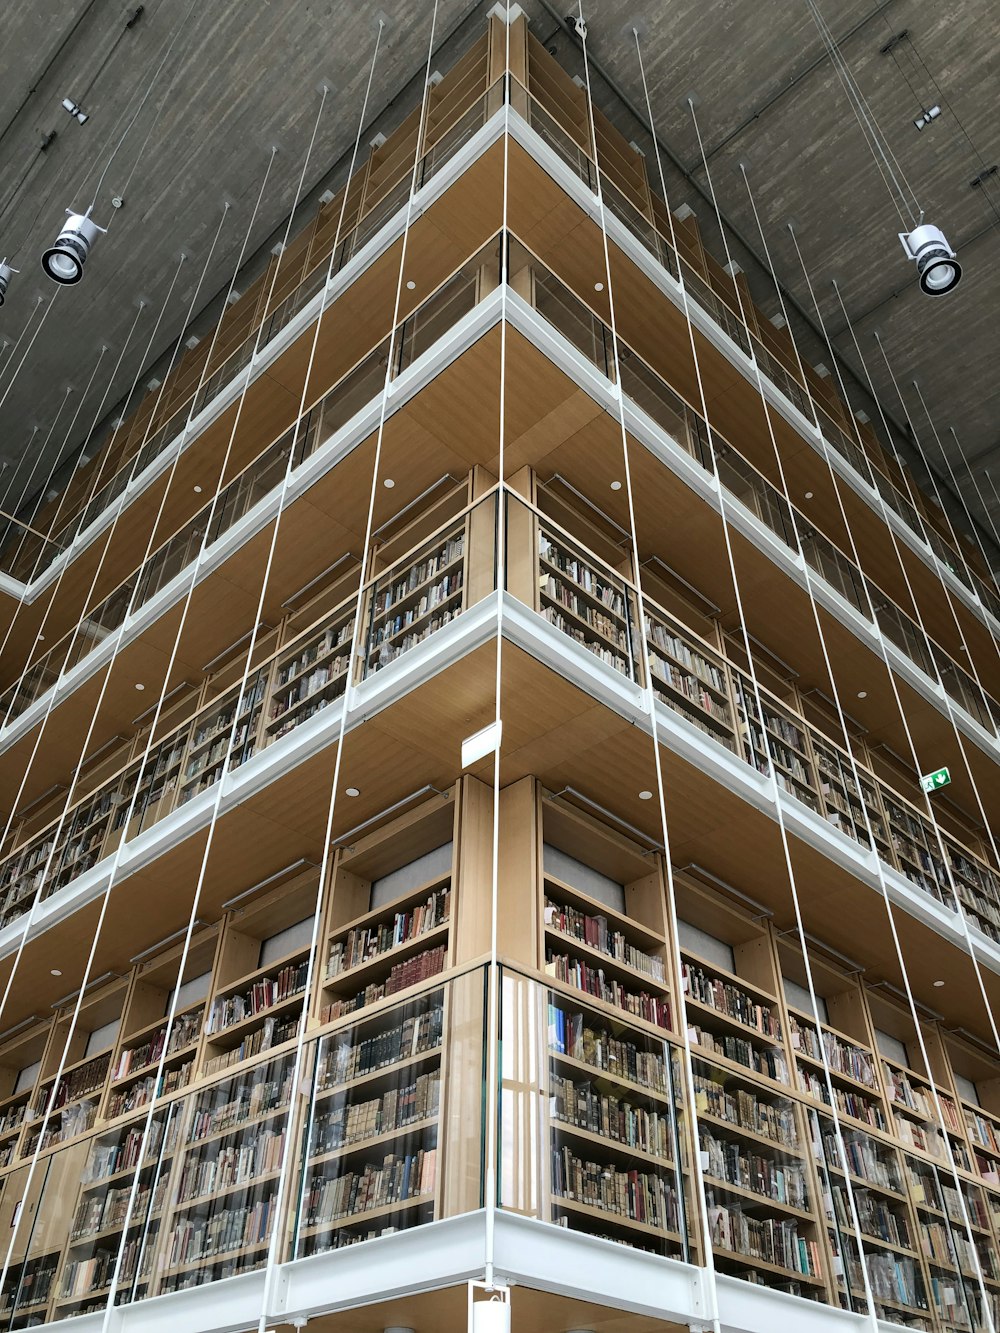 low-angle photography of multi-story bookshelves